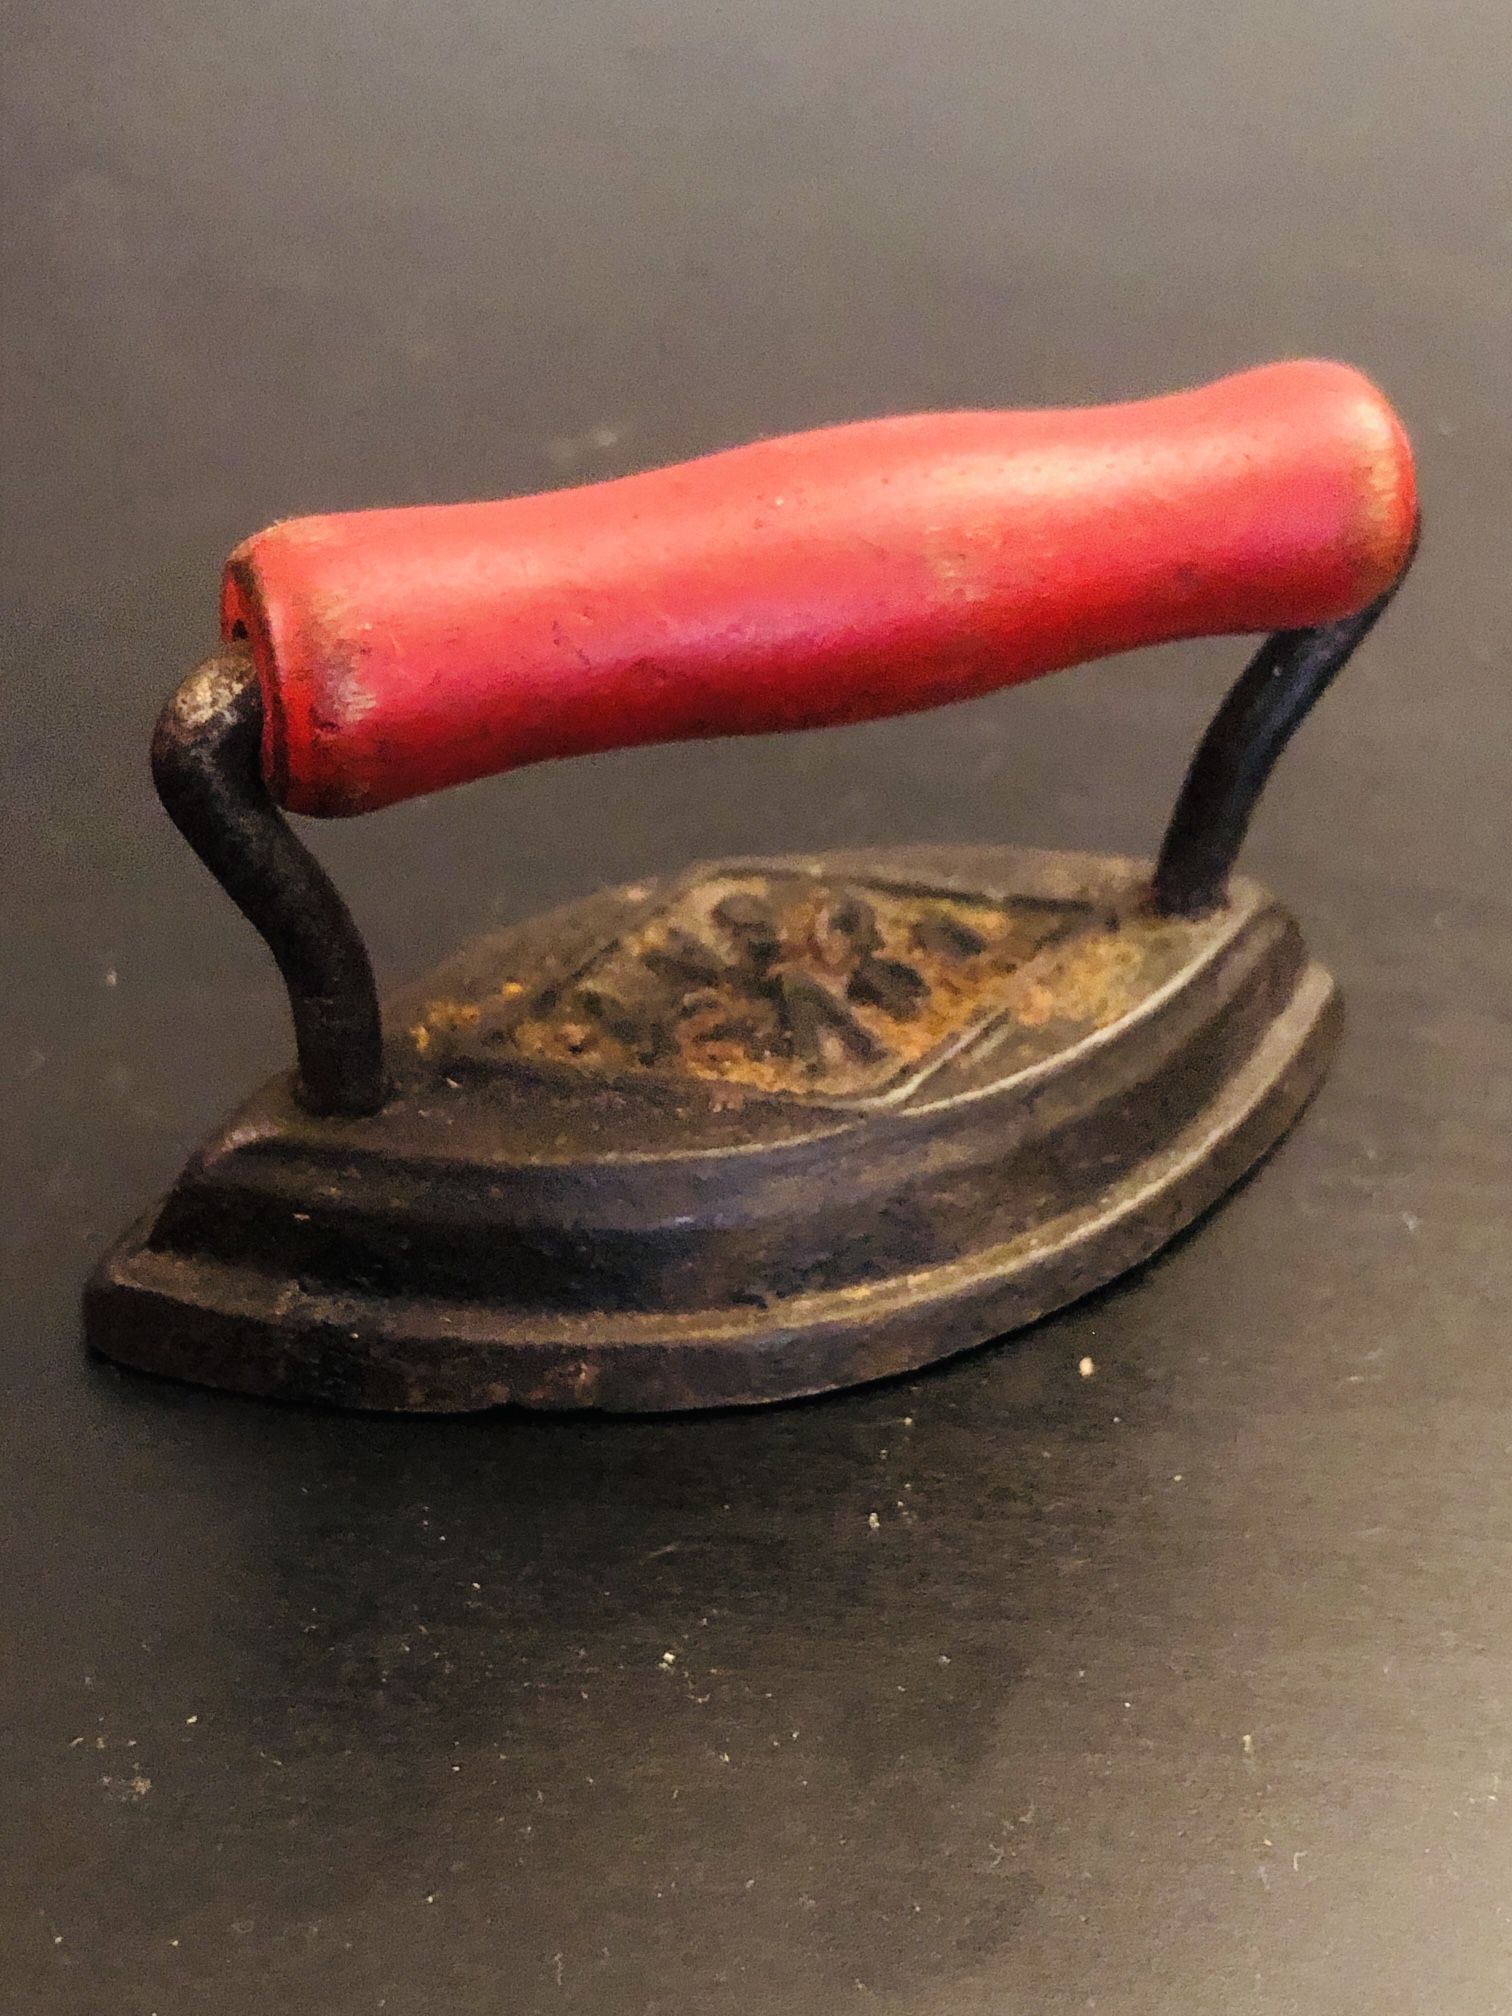 Vintage Toy/ Decor Miniature Dover Sad Iron with red wood handle